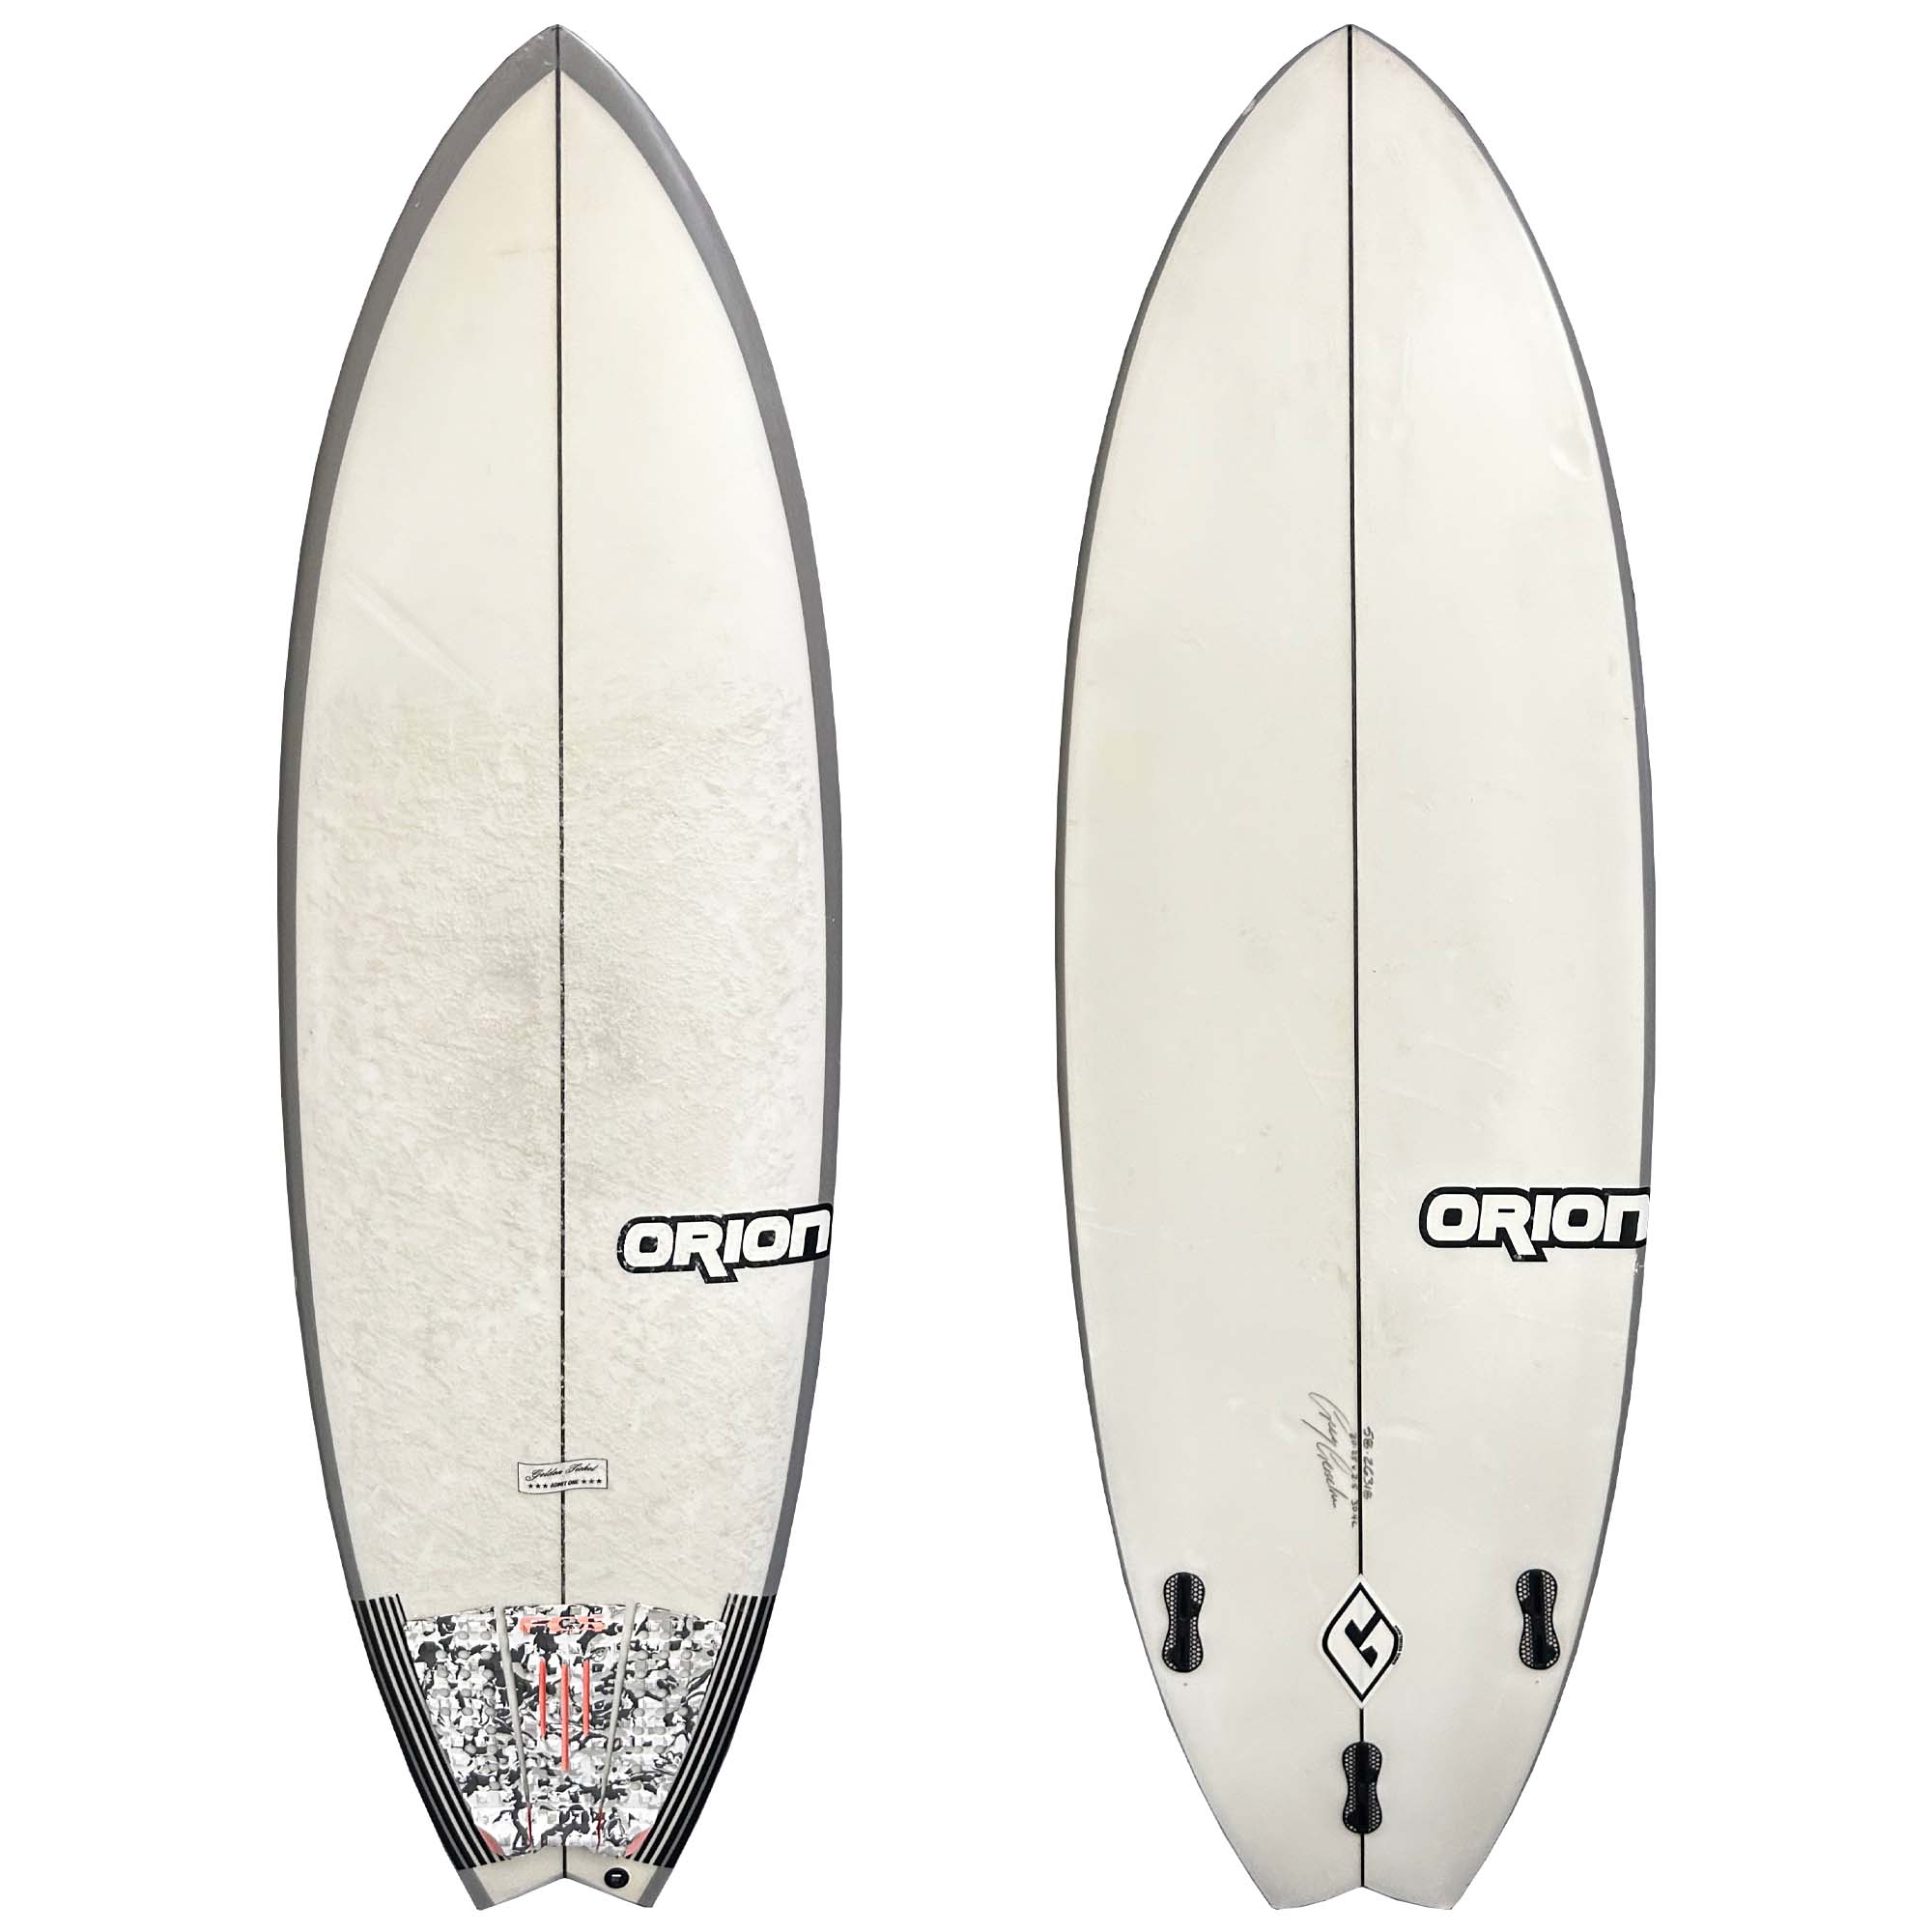 Orion 5'8 Used Surfboard